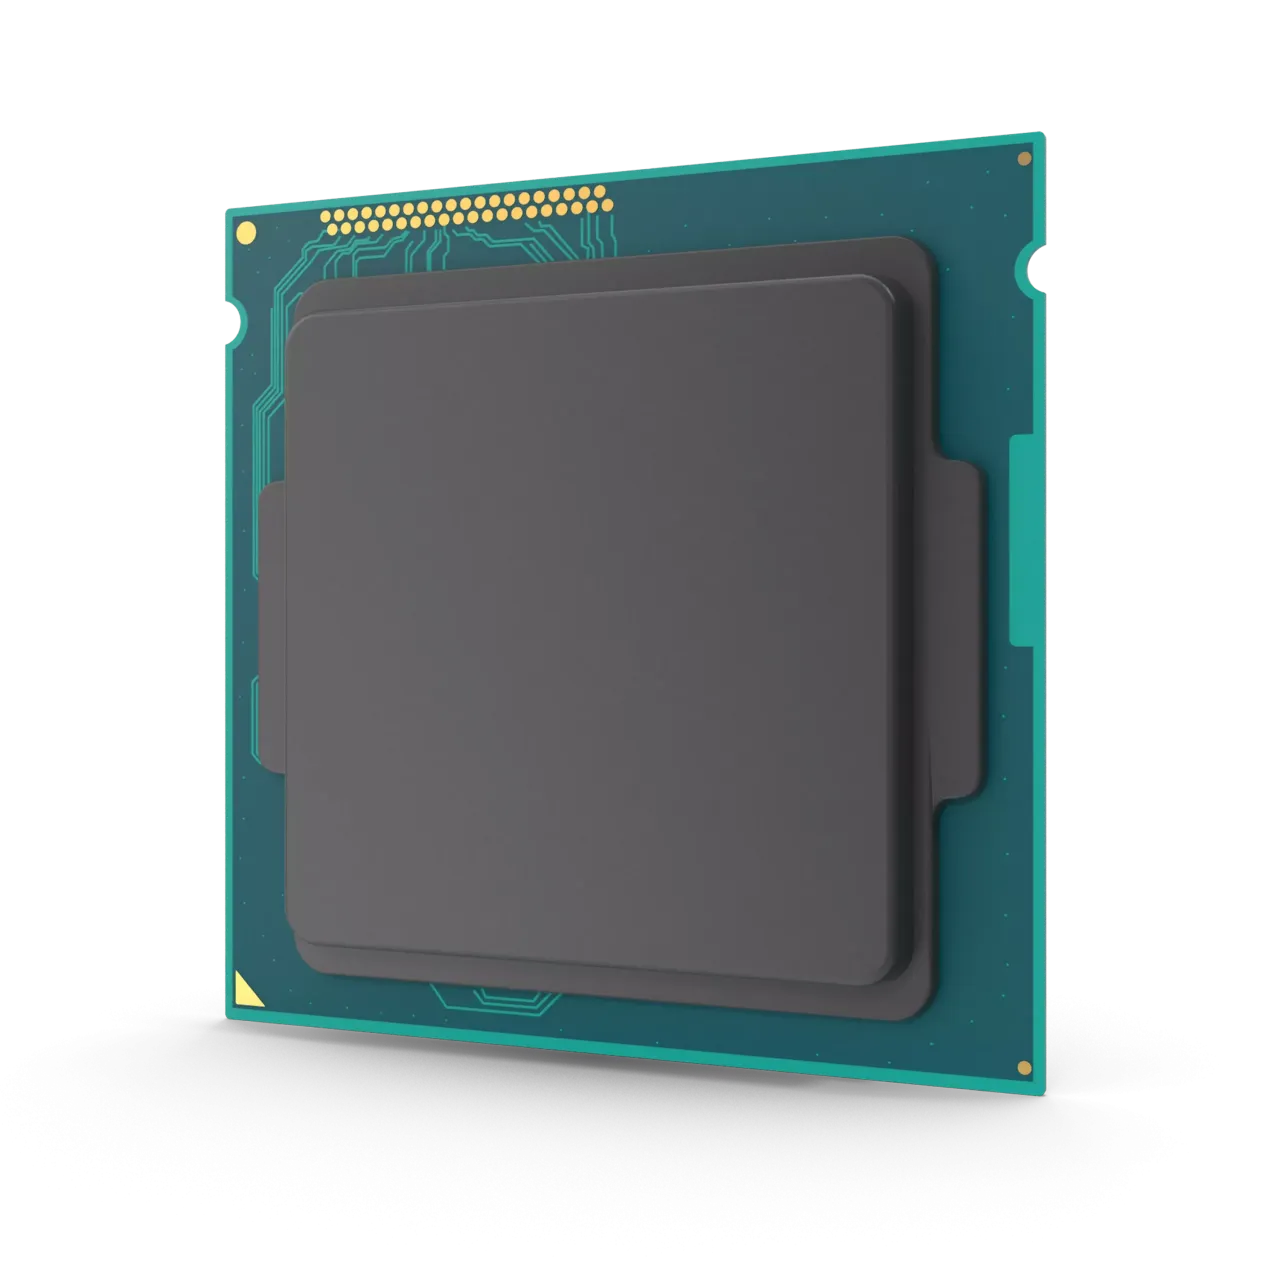 A processor as the Digital Core quickcard header image